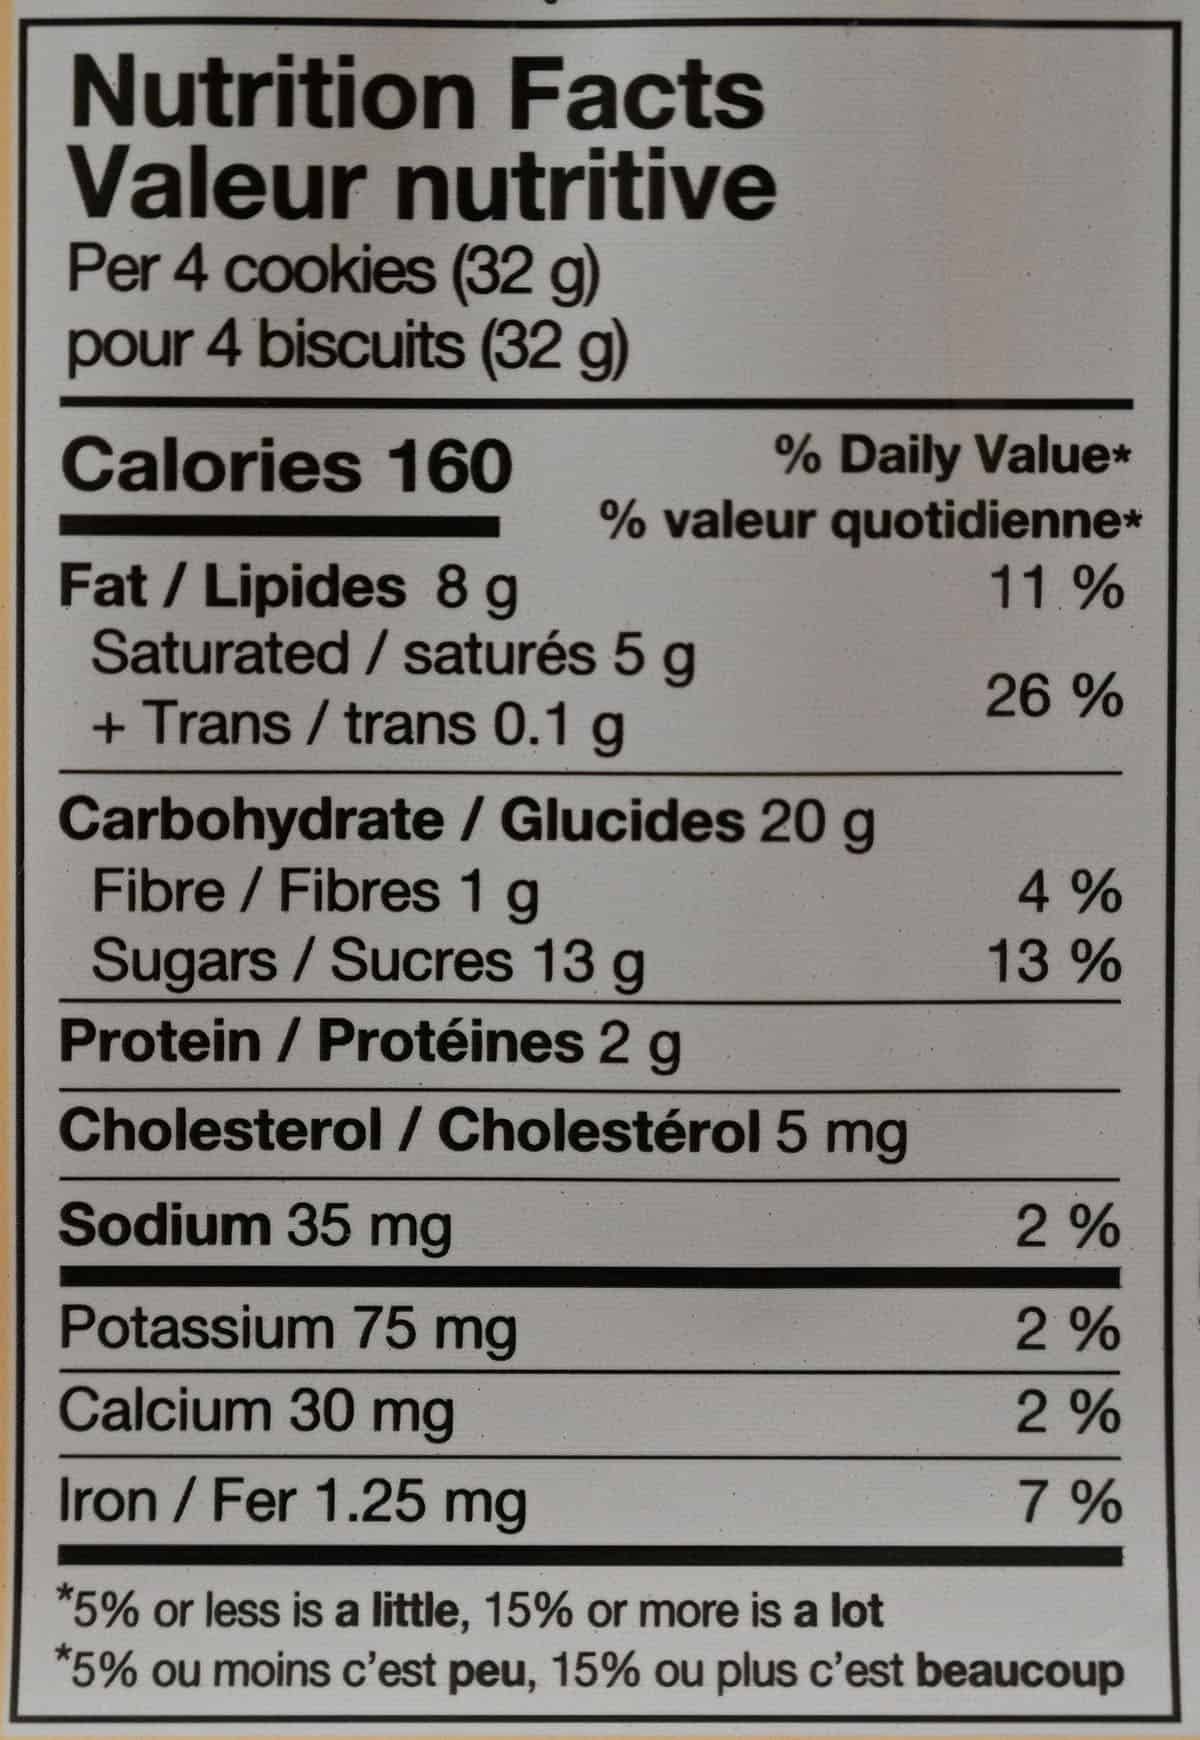 Image of the nutrition facts label from the tin of cookies.